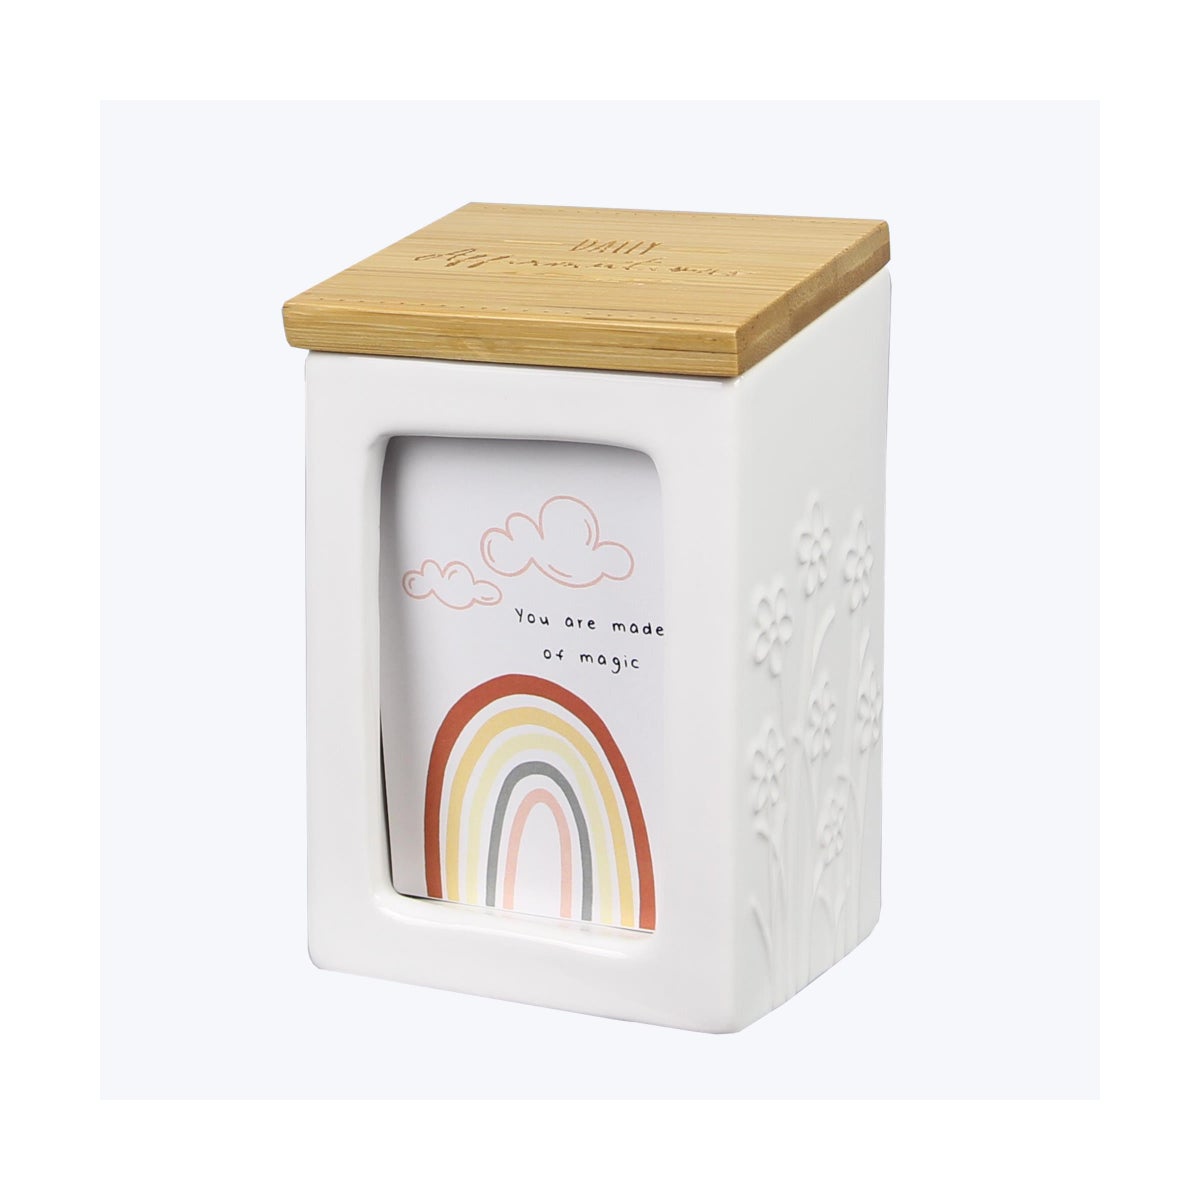 Ceramic Daily Affirmation Box with 50 Inspiration Cards